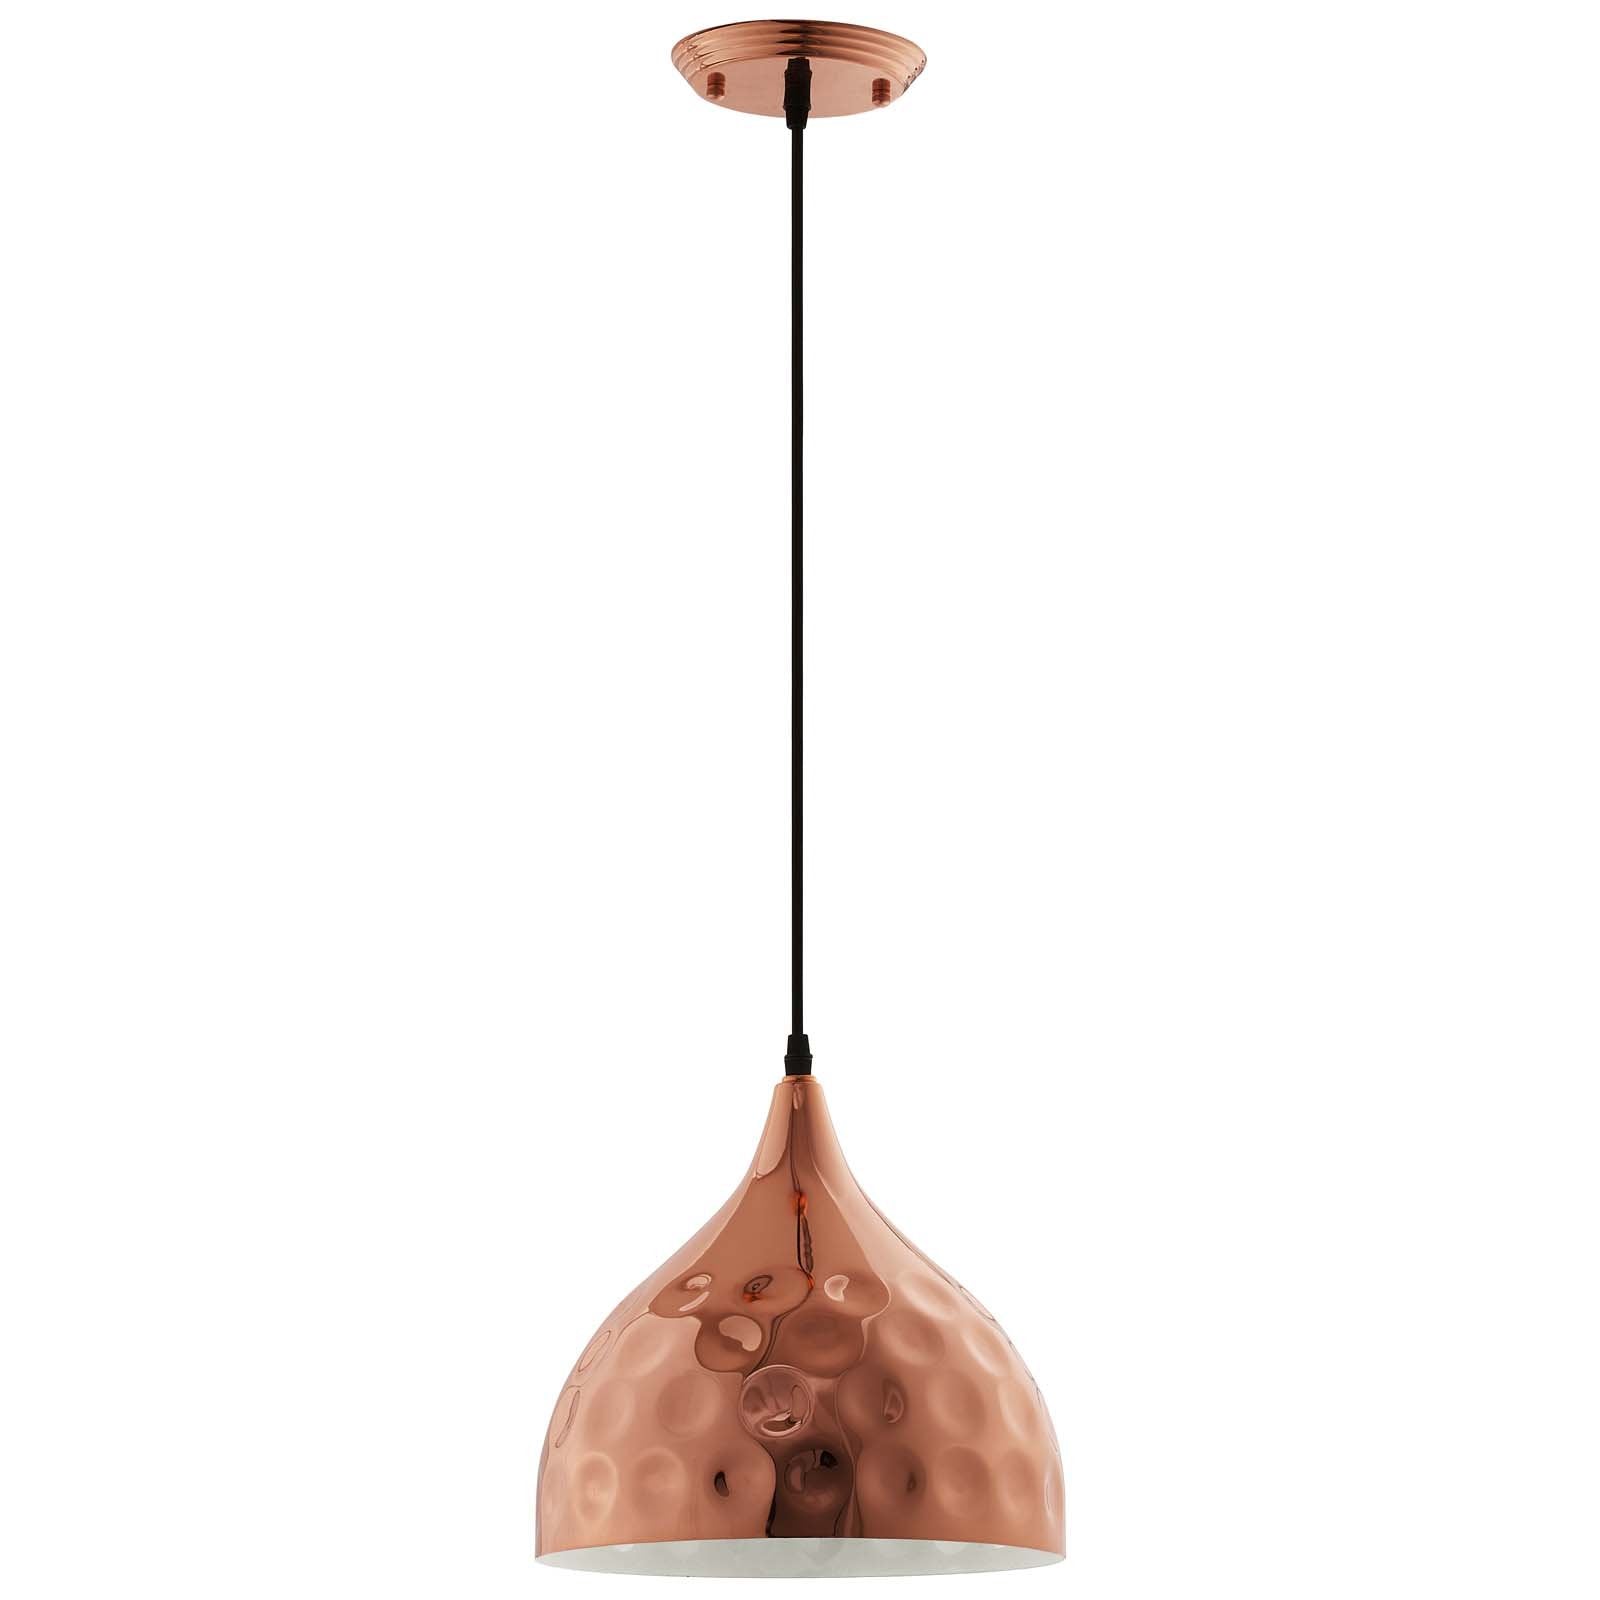 6.5" Dimple Rose-Gold Plated Pendant Ceiling Light - 60W - Bell Shaped